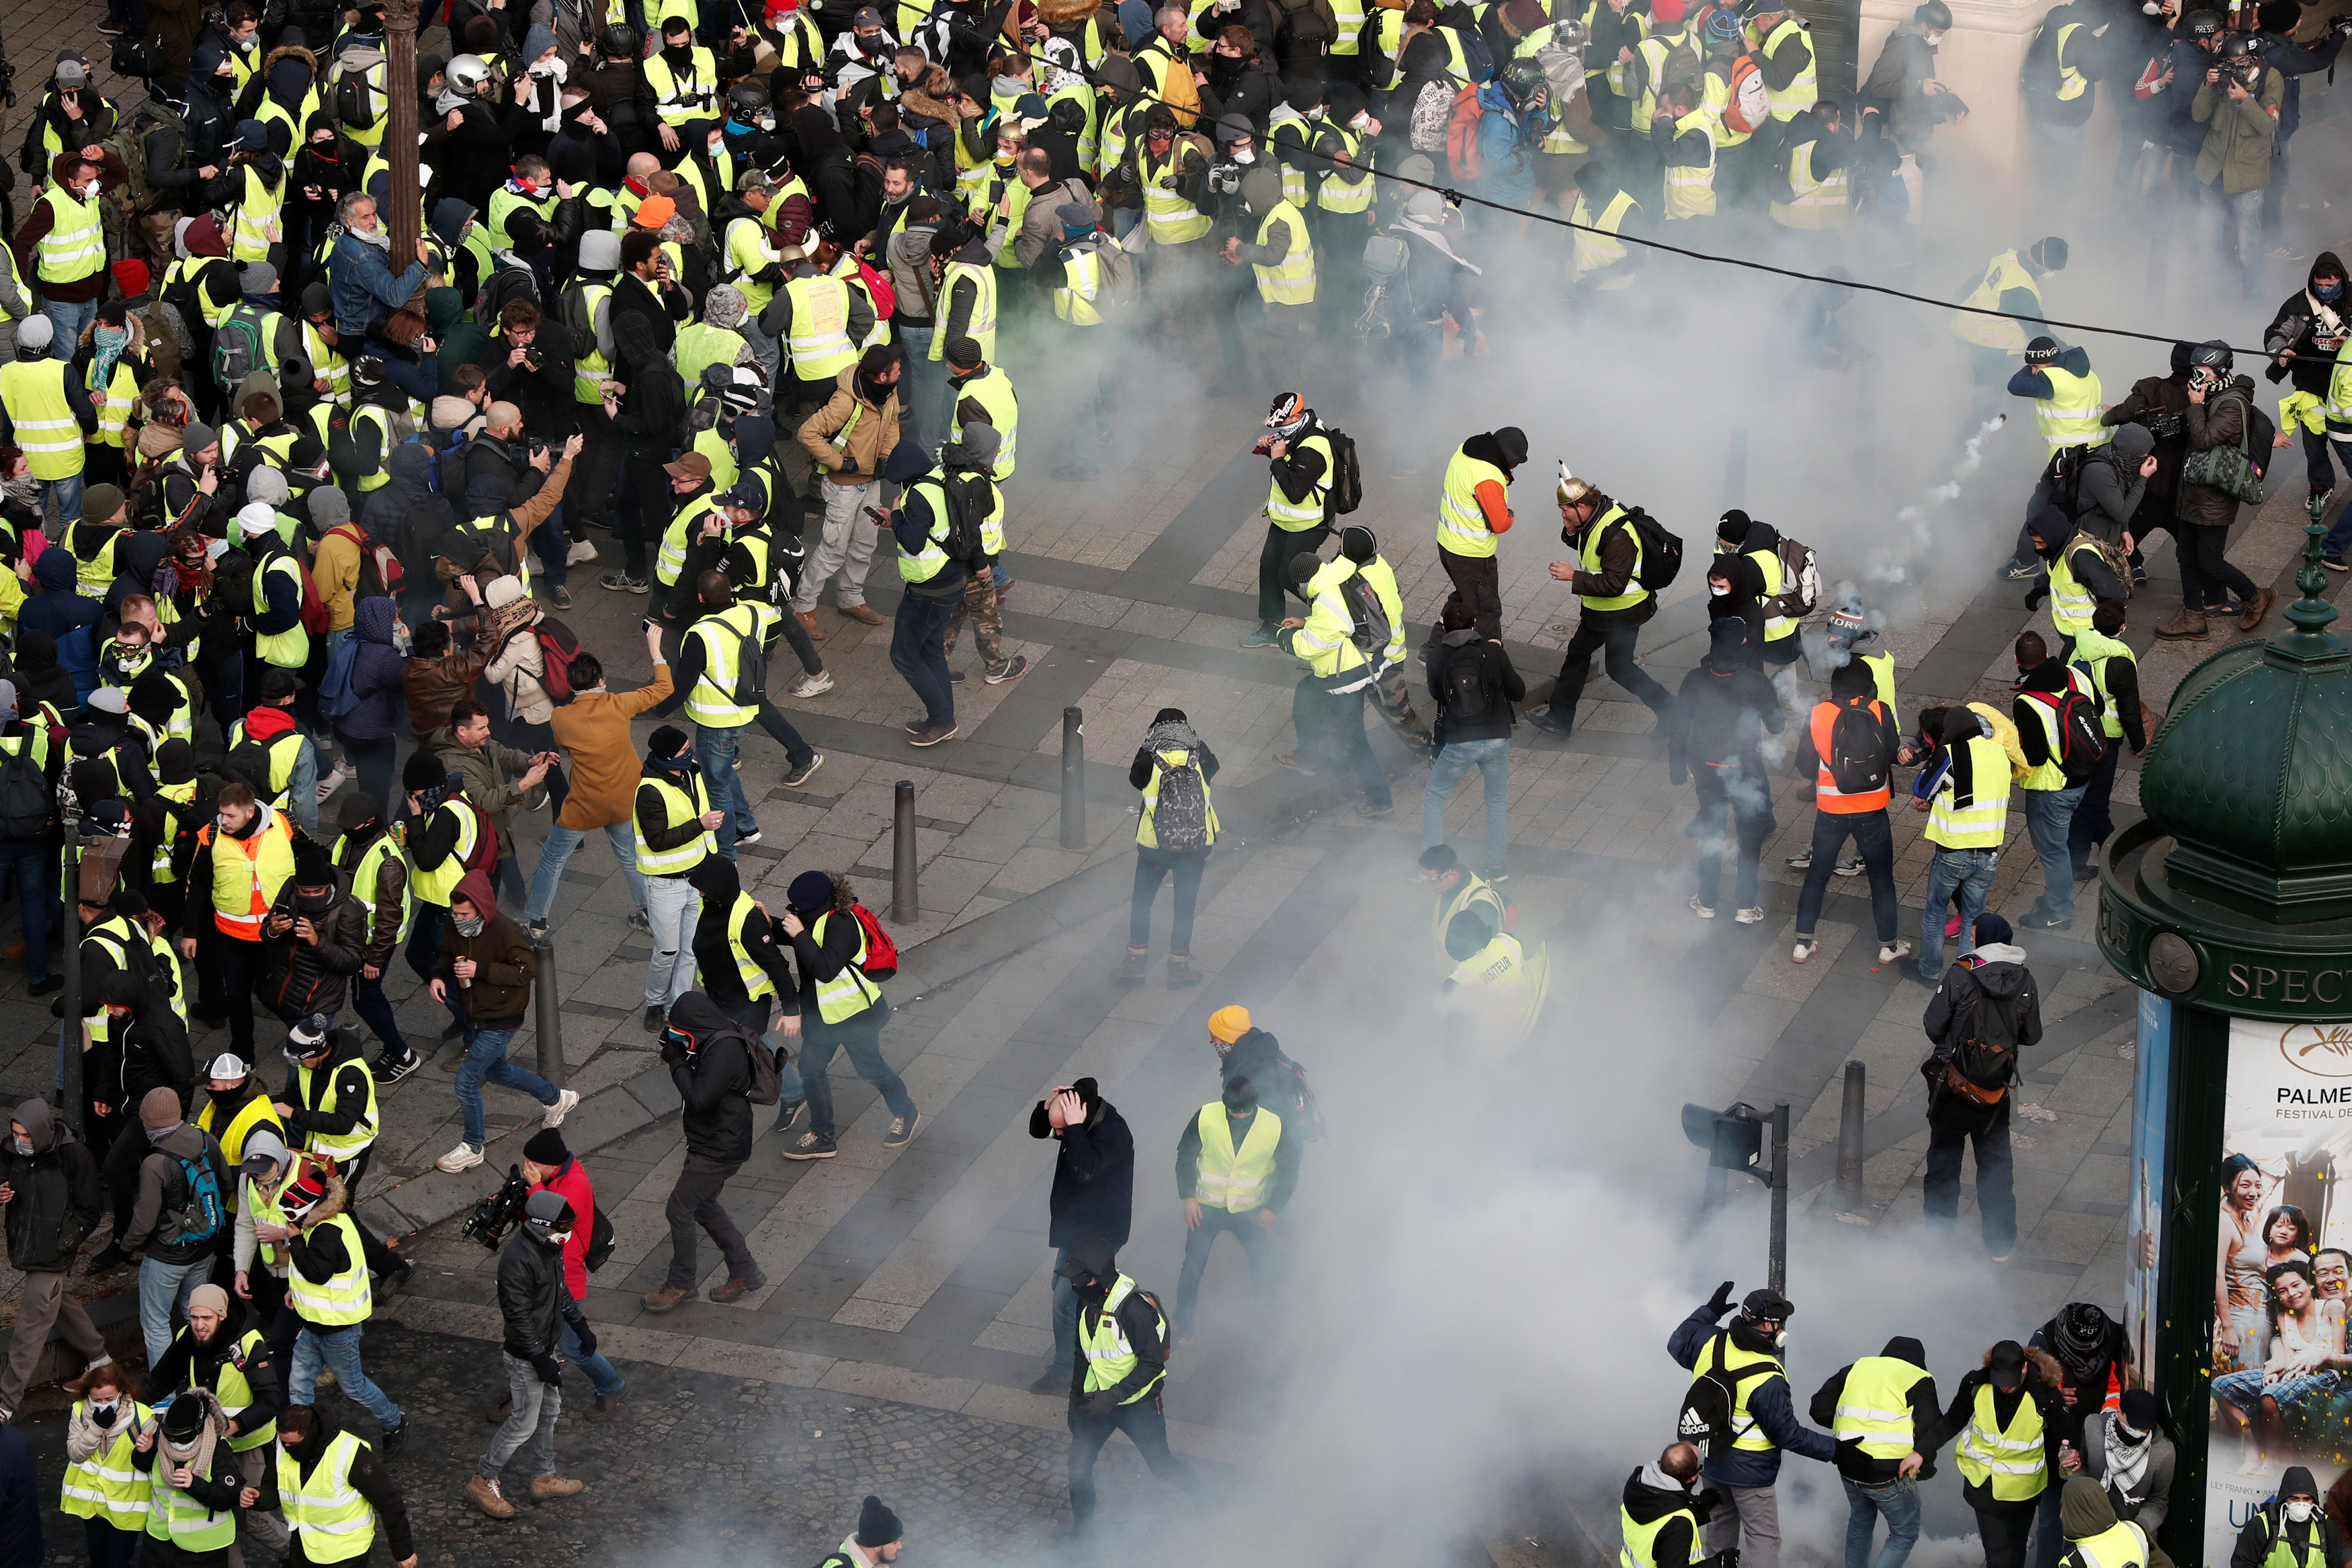 2018-12-08T111845Z_561637670_RC1B18977150_RTRMADP_3_FRANCE-PROTESTS